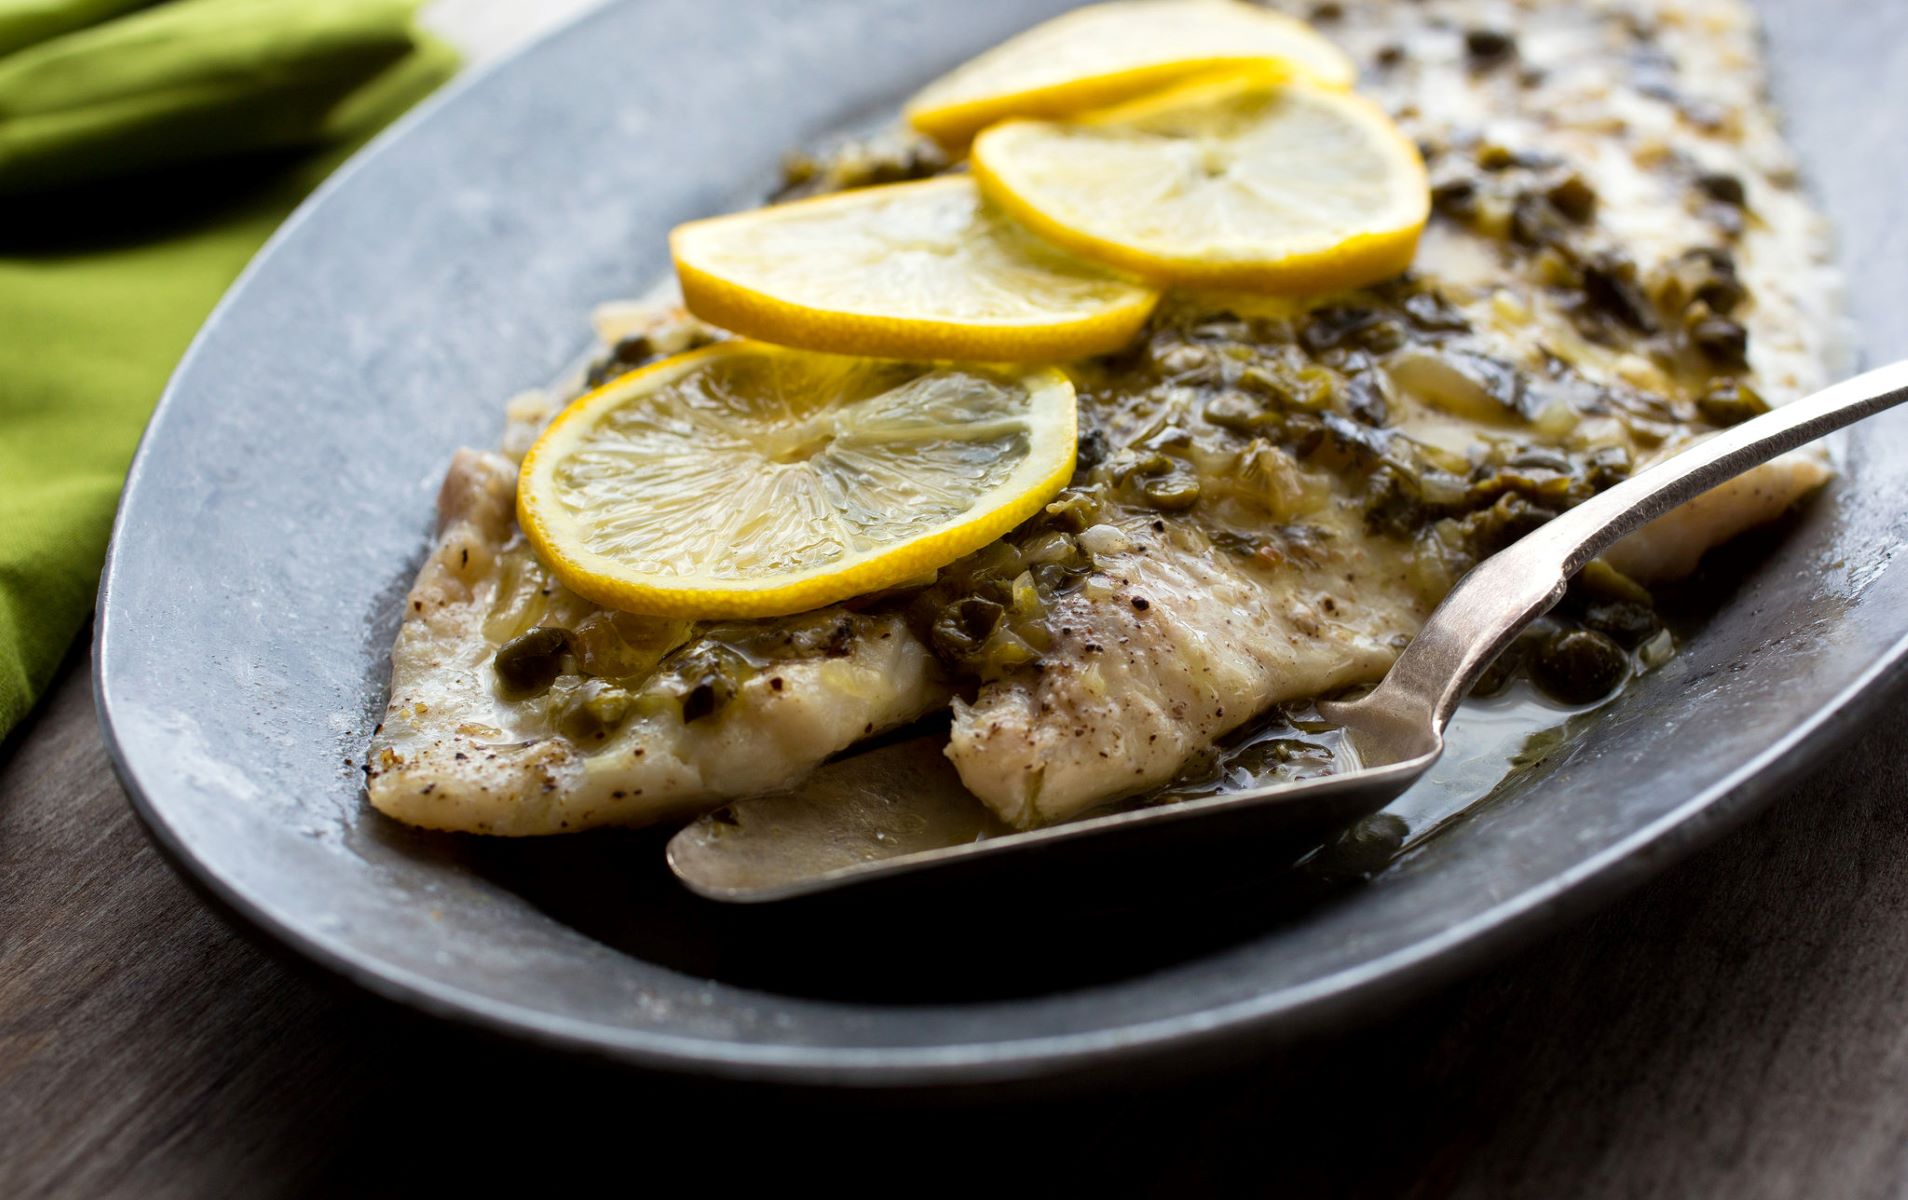 Delicious Sole With Capers, Cornichons, And A Rich Brown Sauce